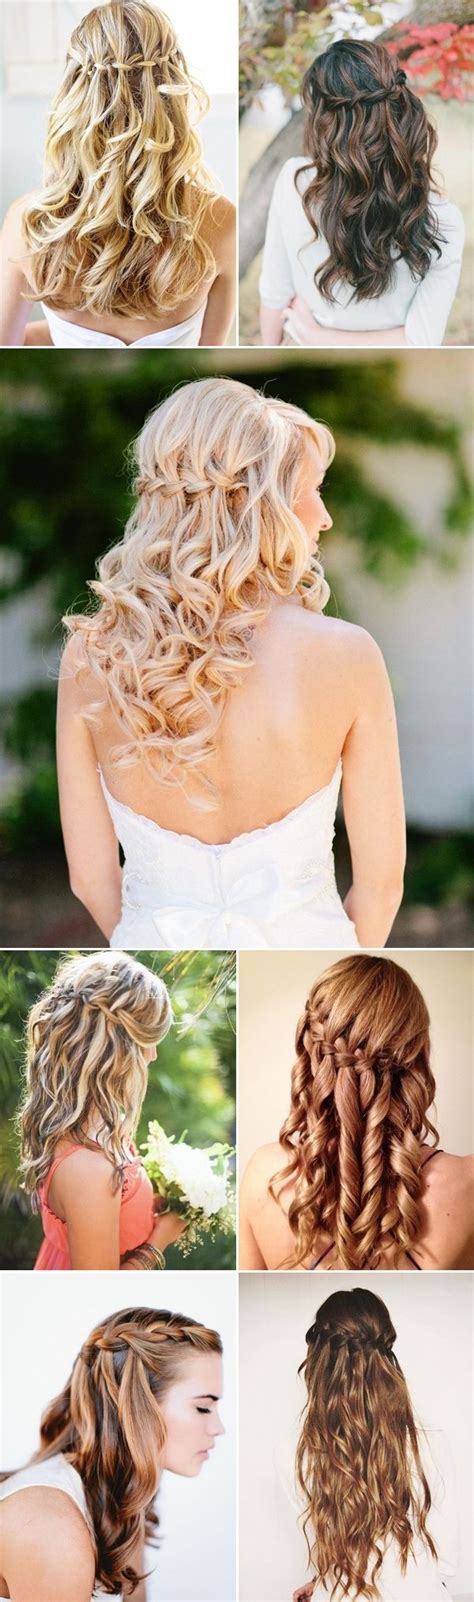 25 bridesmaids' half up hairstyles that inspire. 32 Overwhelming Bridesmaids Hairstyles - Pretty Designs